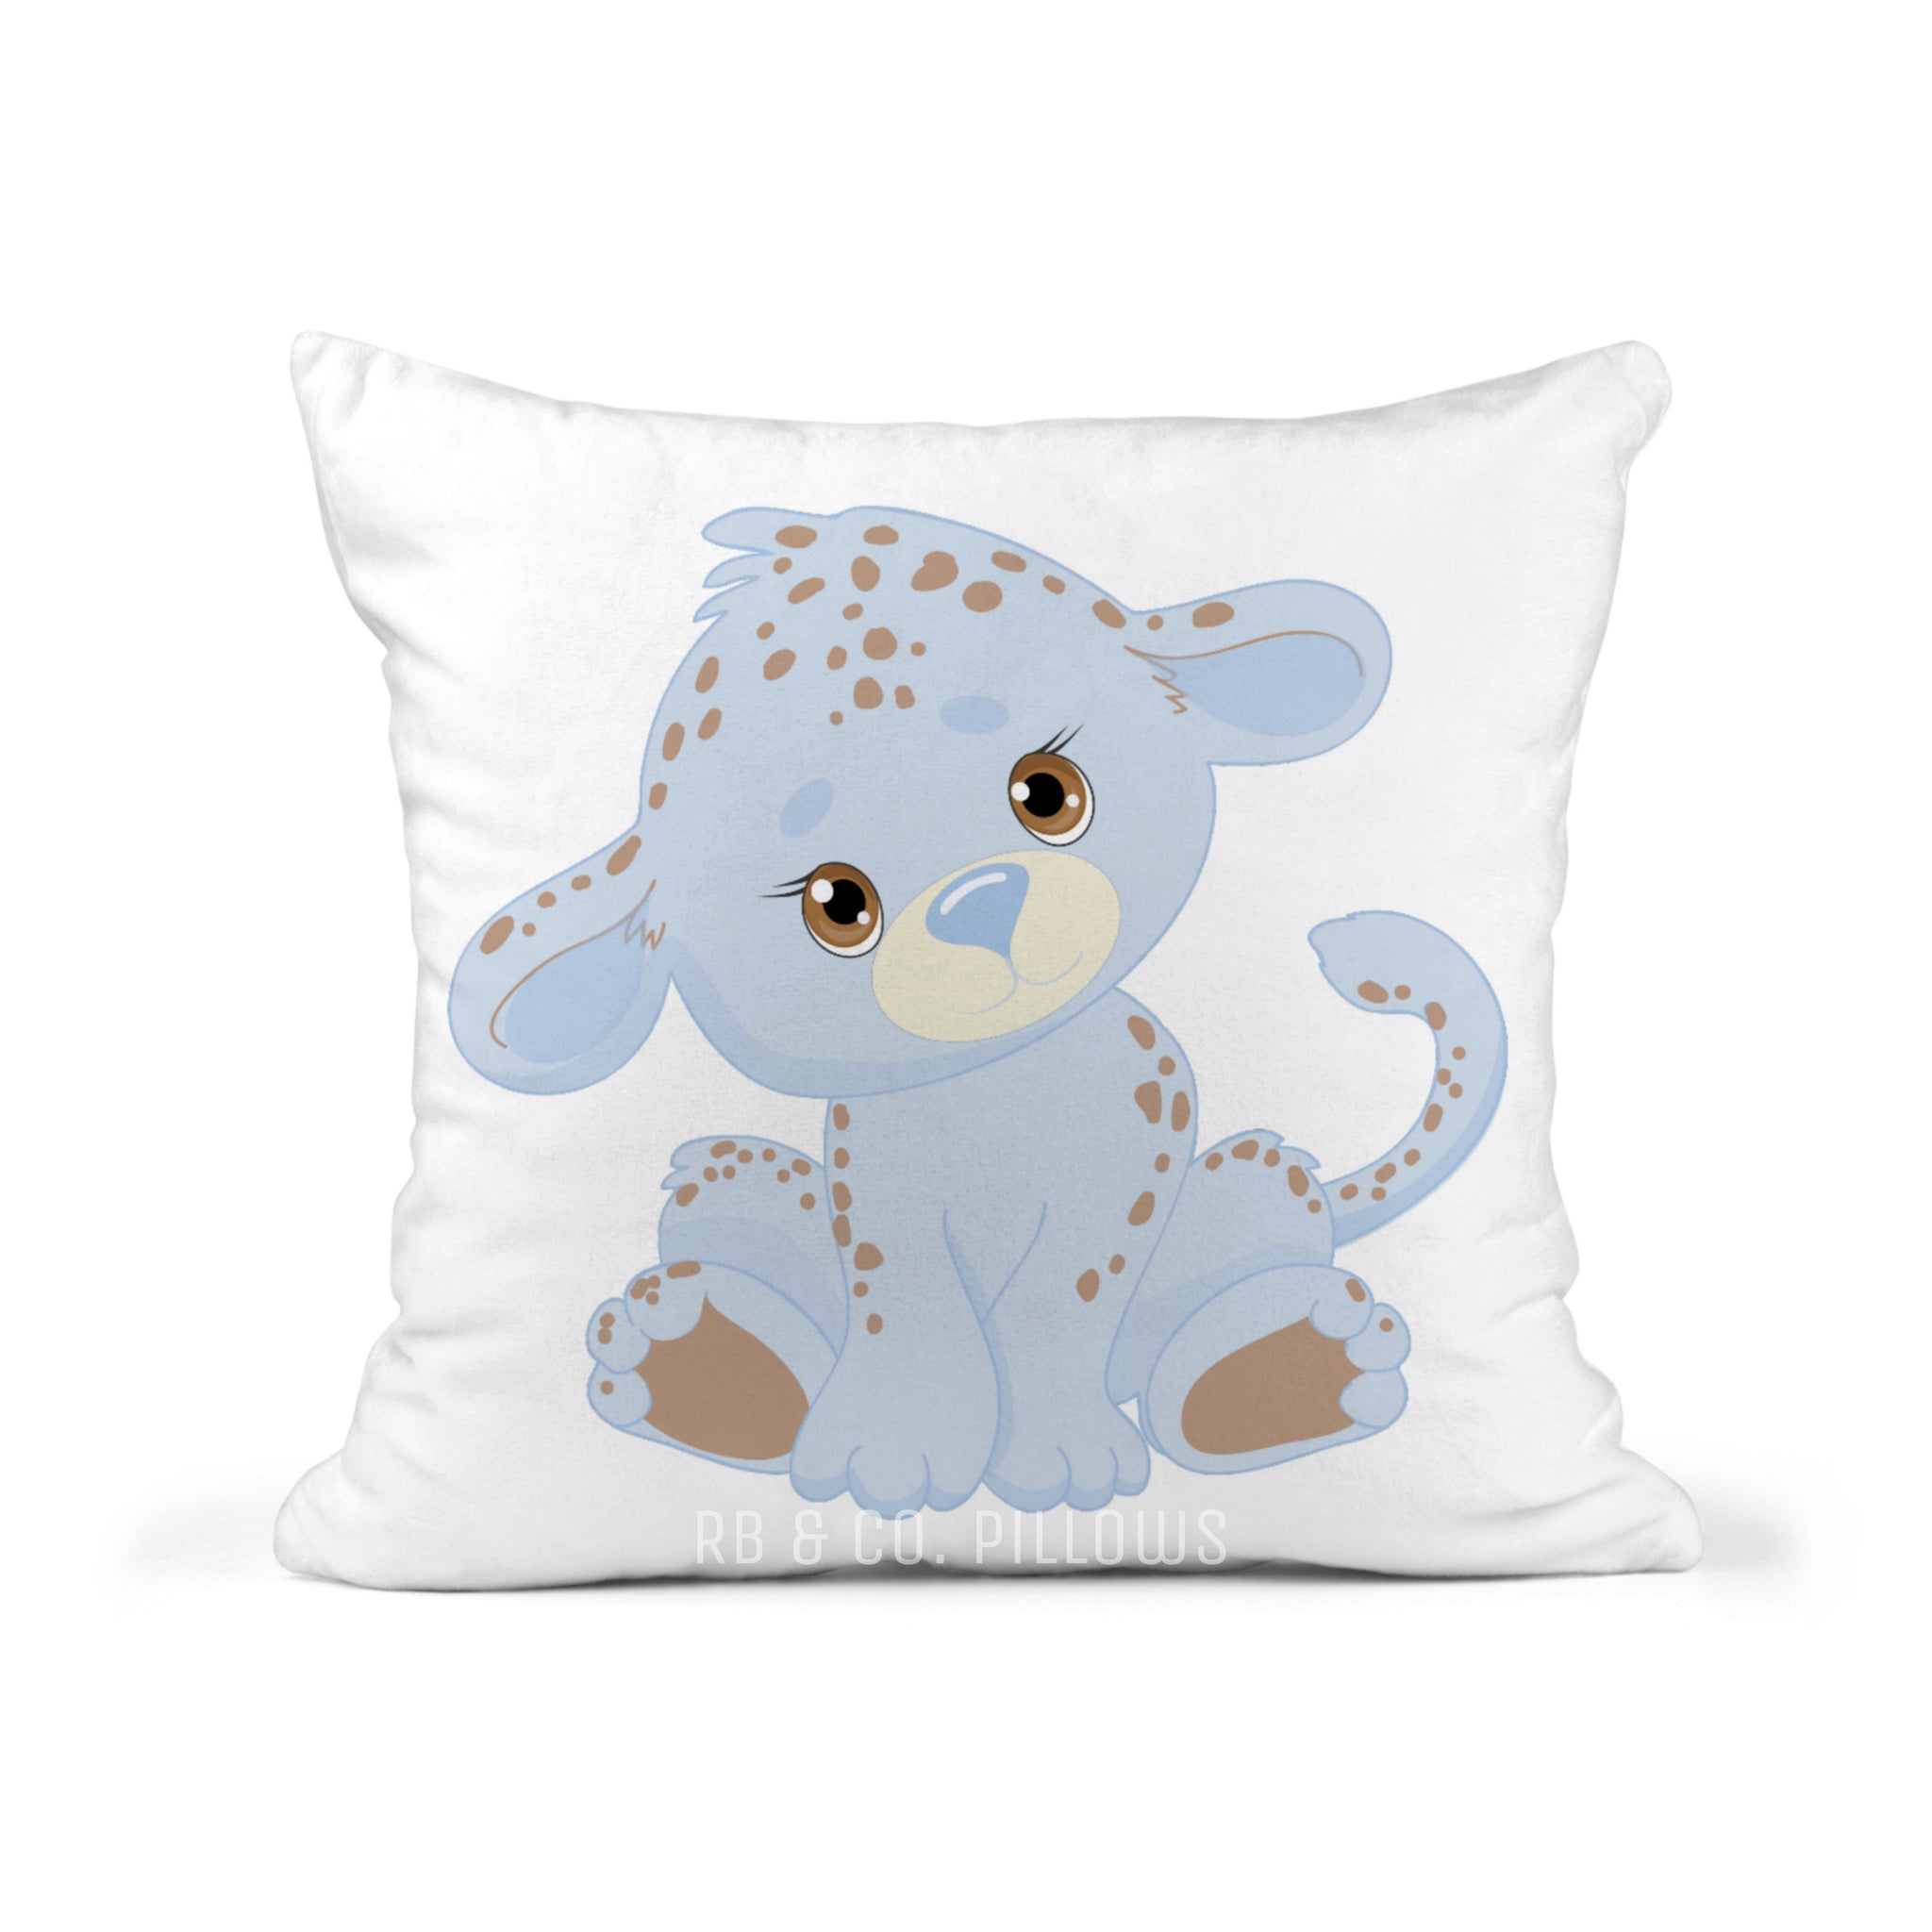 Me and My Giraffe - Custom Picture Pillow with Name for Kids